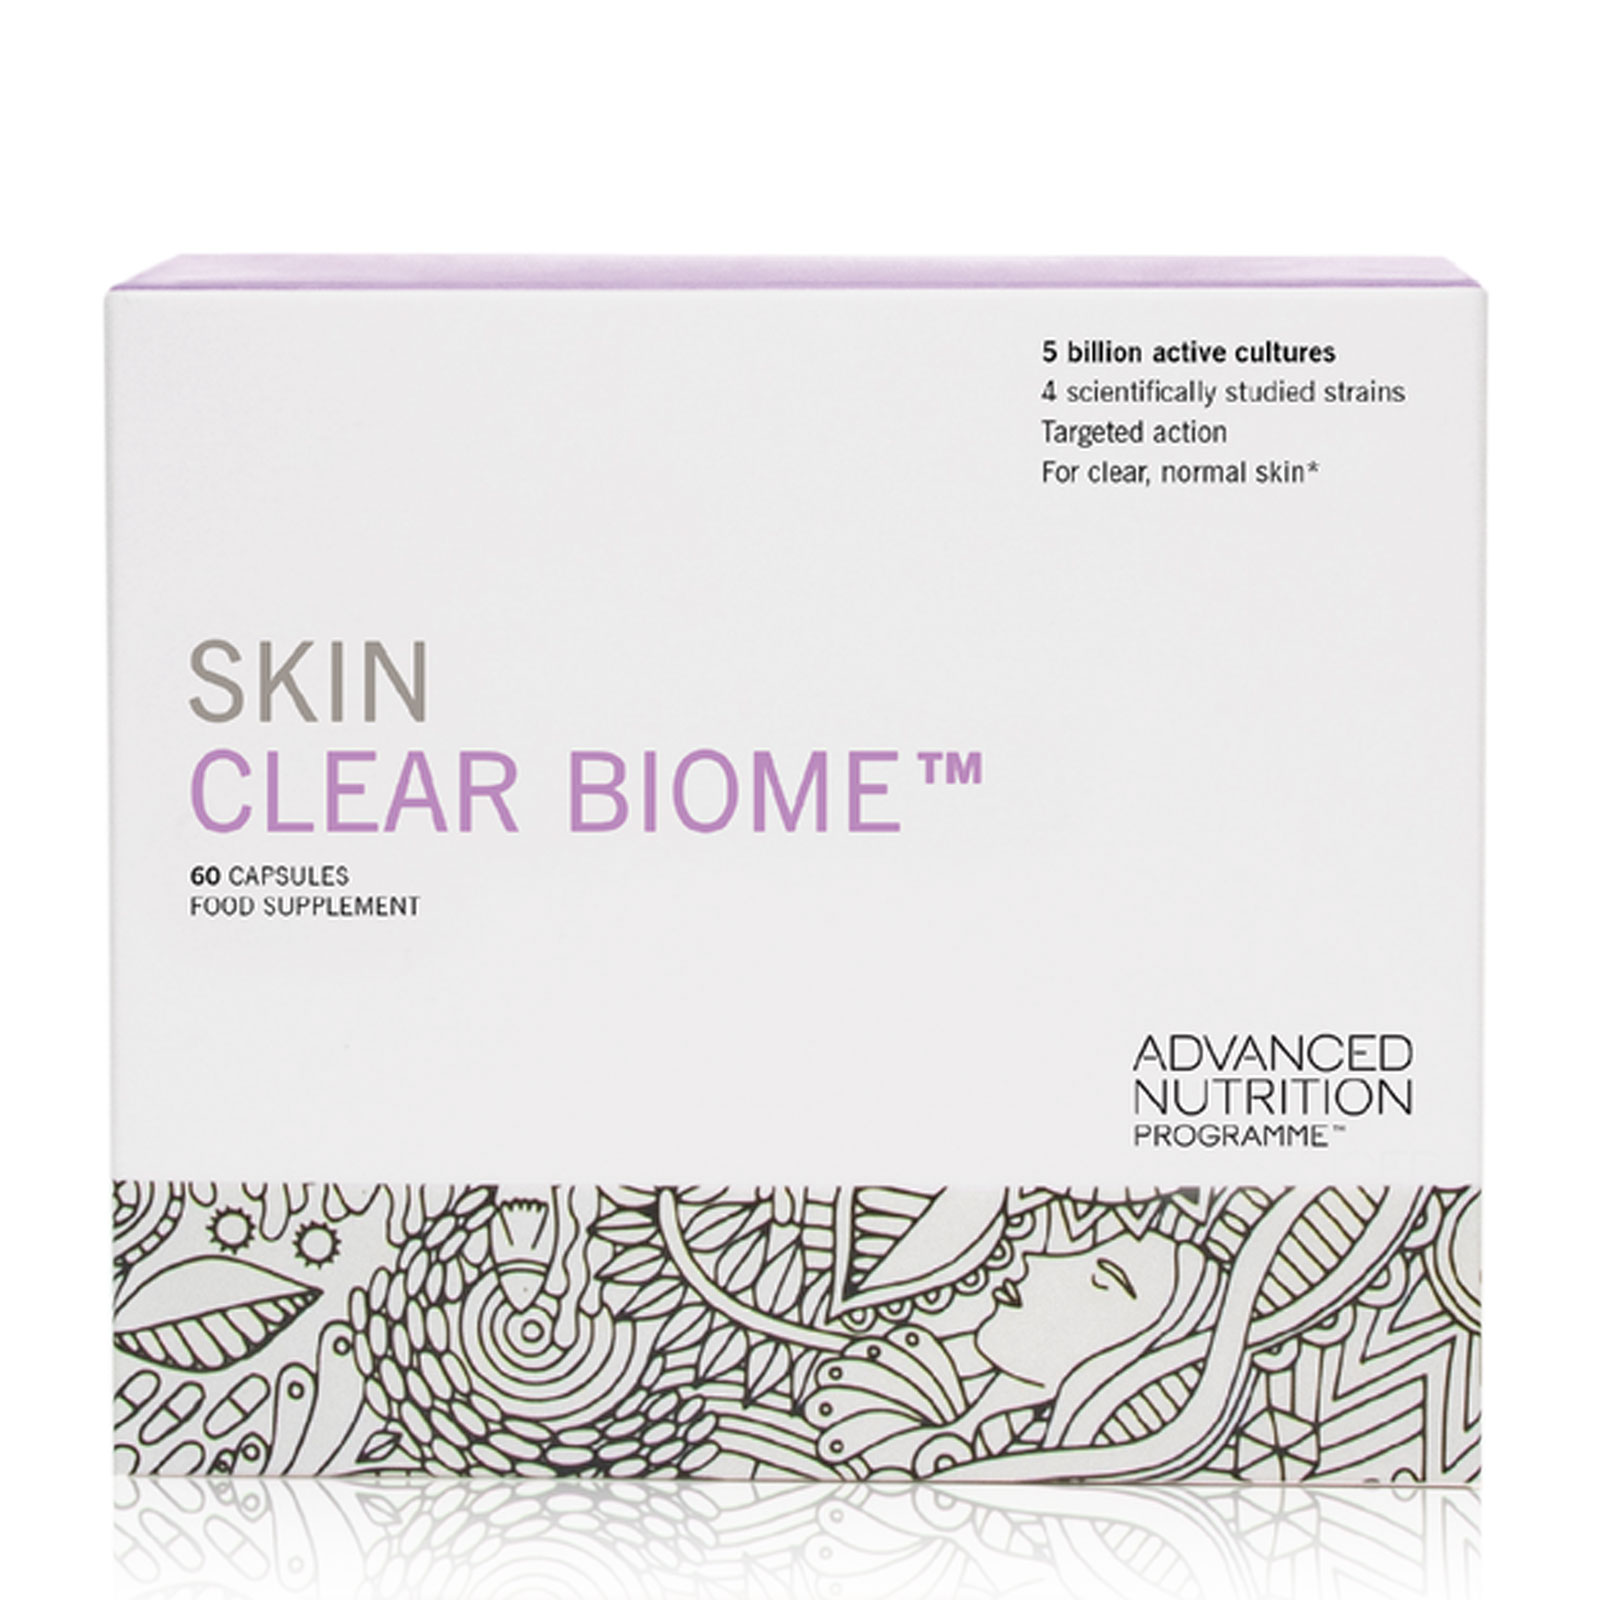 Advanced Nutrition Programme Skin Clear Biome X 60 Capsules